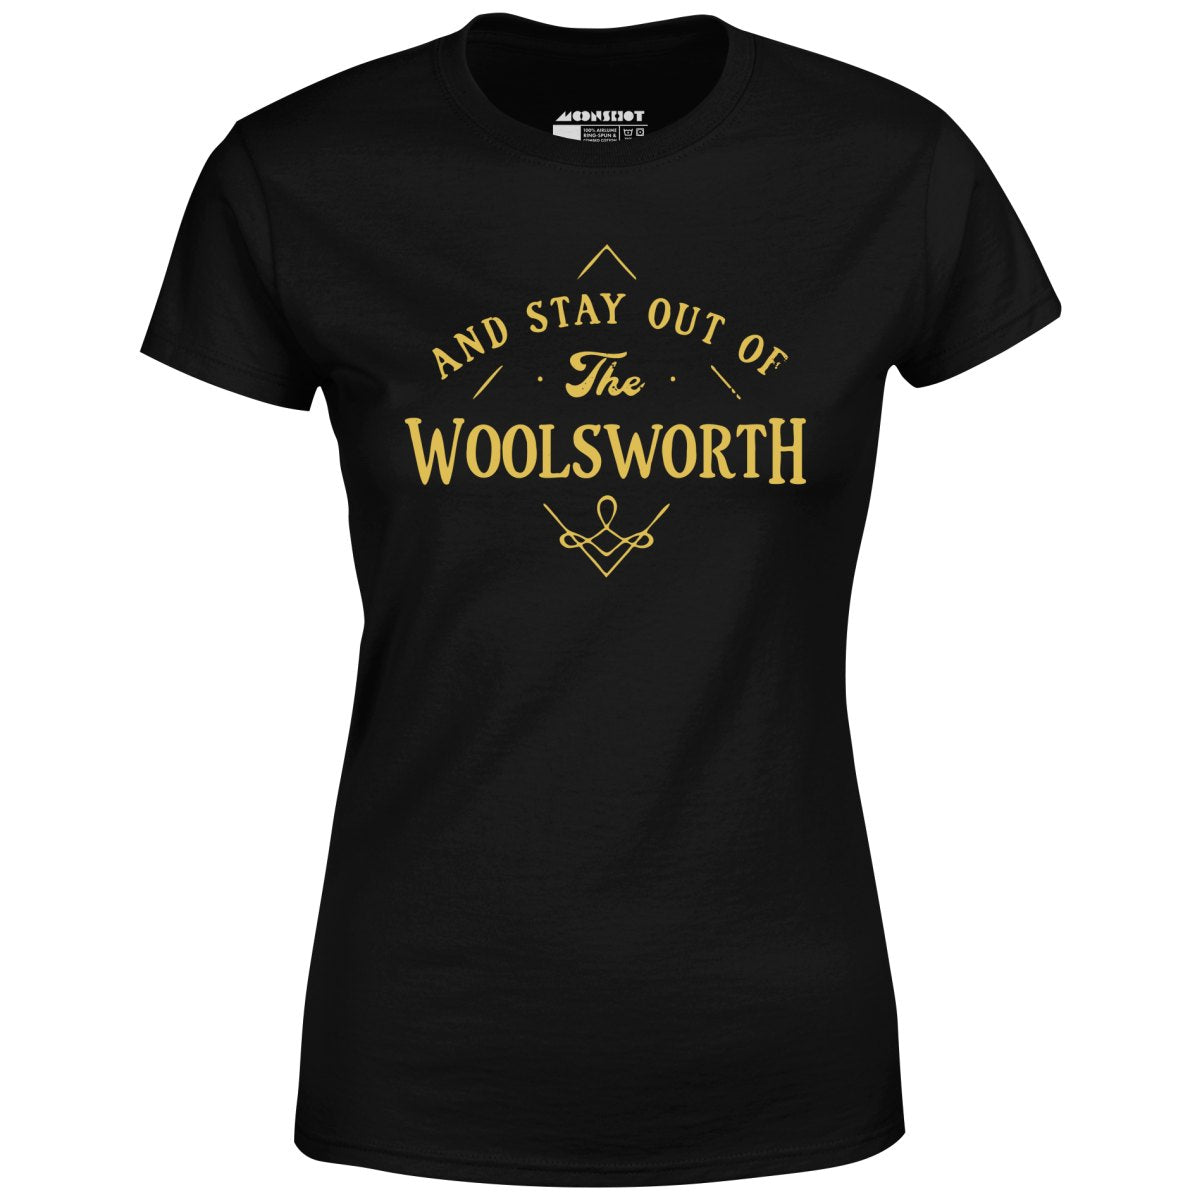 And Stay Out of The Woolsworth - Women's T-Shirt